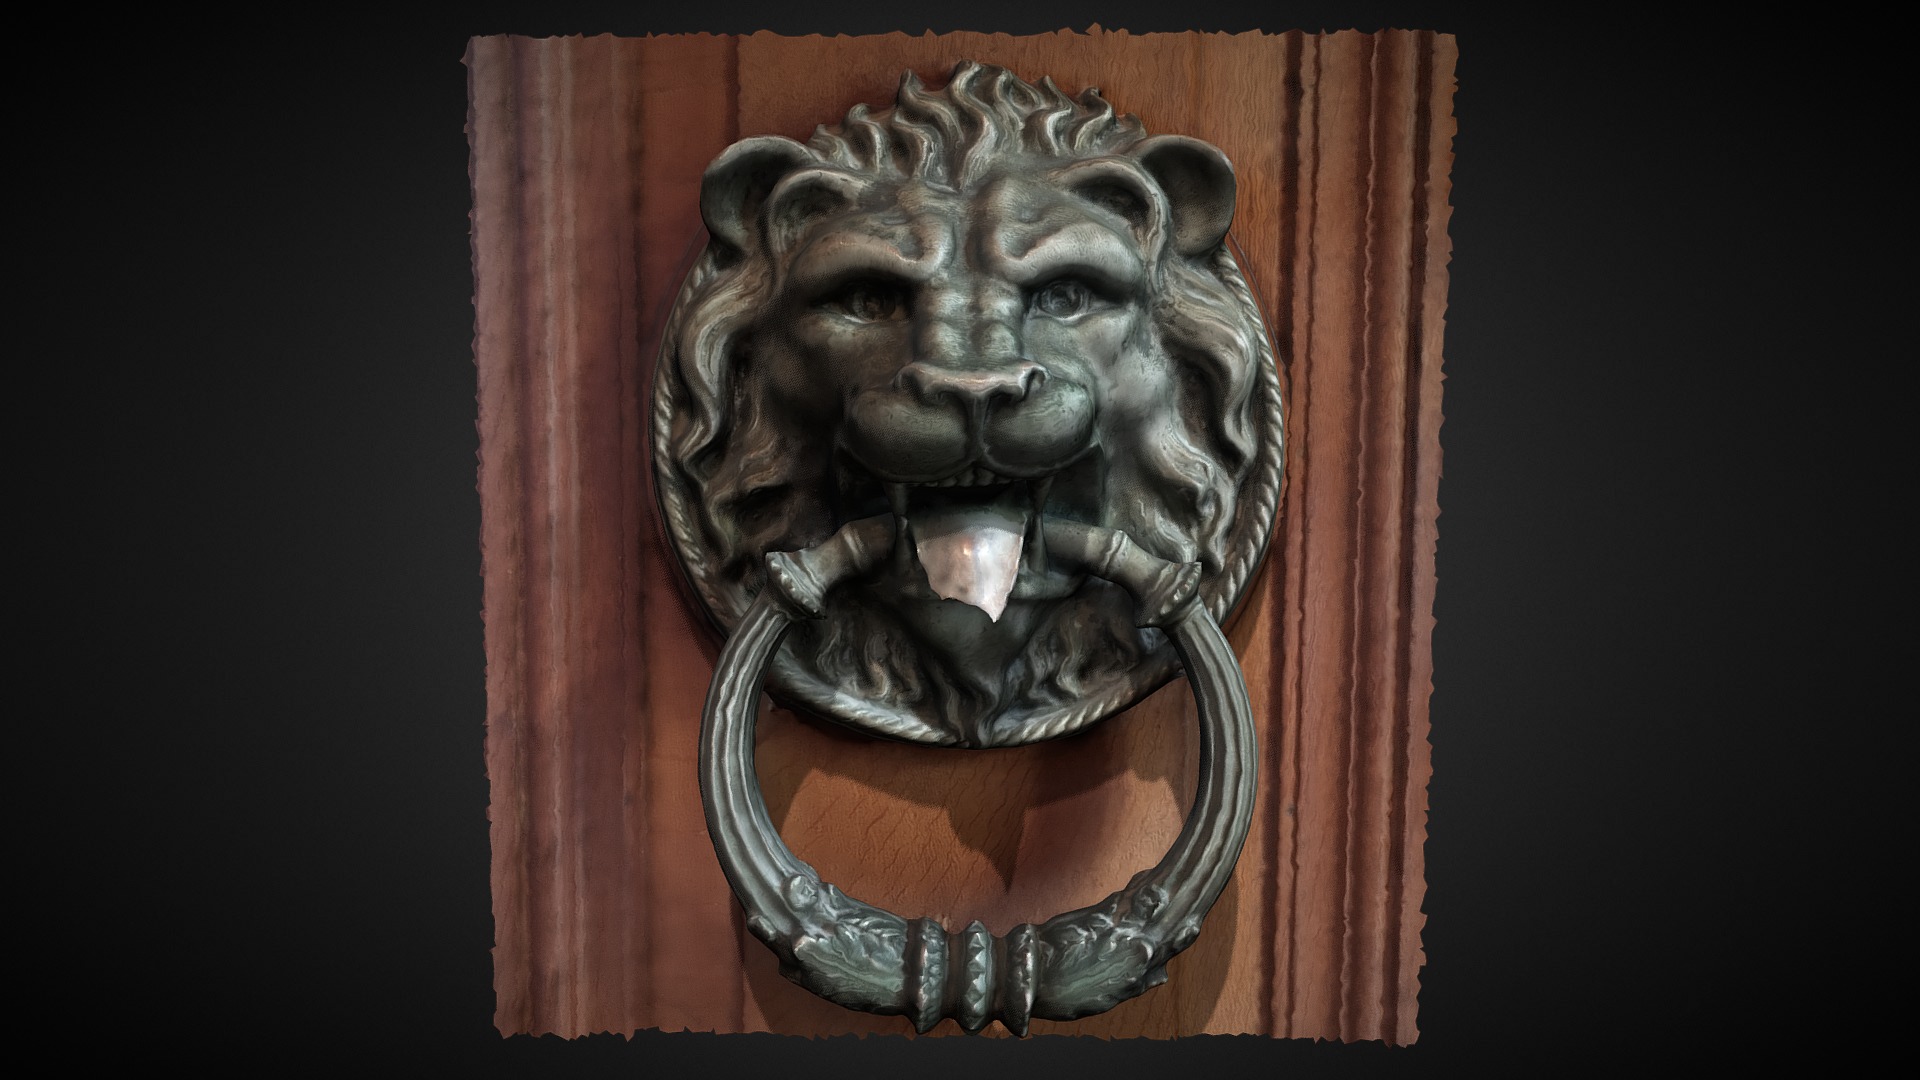 3D model Medieval Lion door handle from Sintra Castle - This is a 3D model of the Medieval Lion door handle from Sintra Castle. The 3D model is about a close-up of a statue.